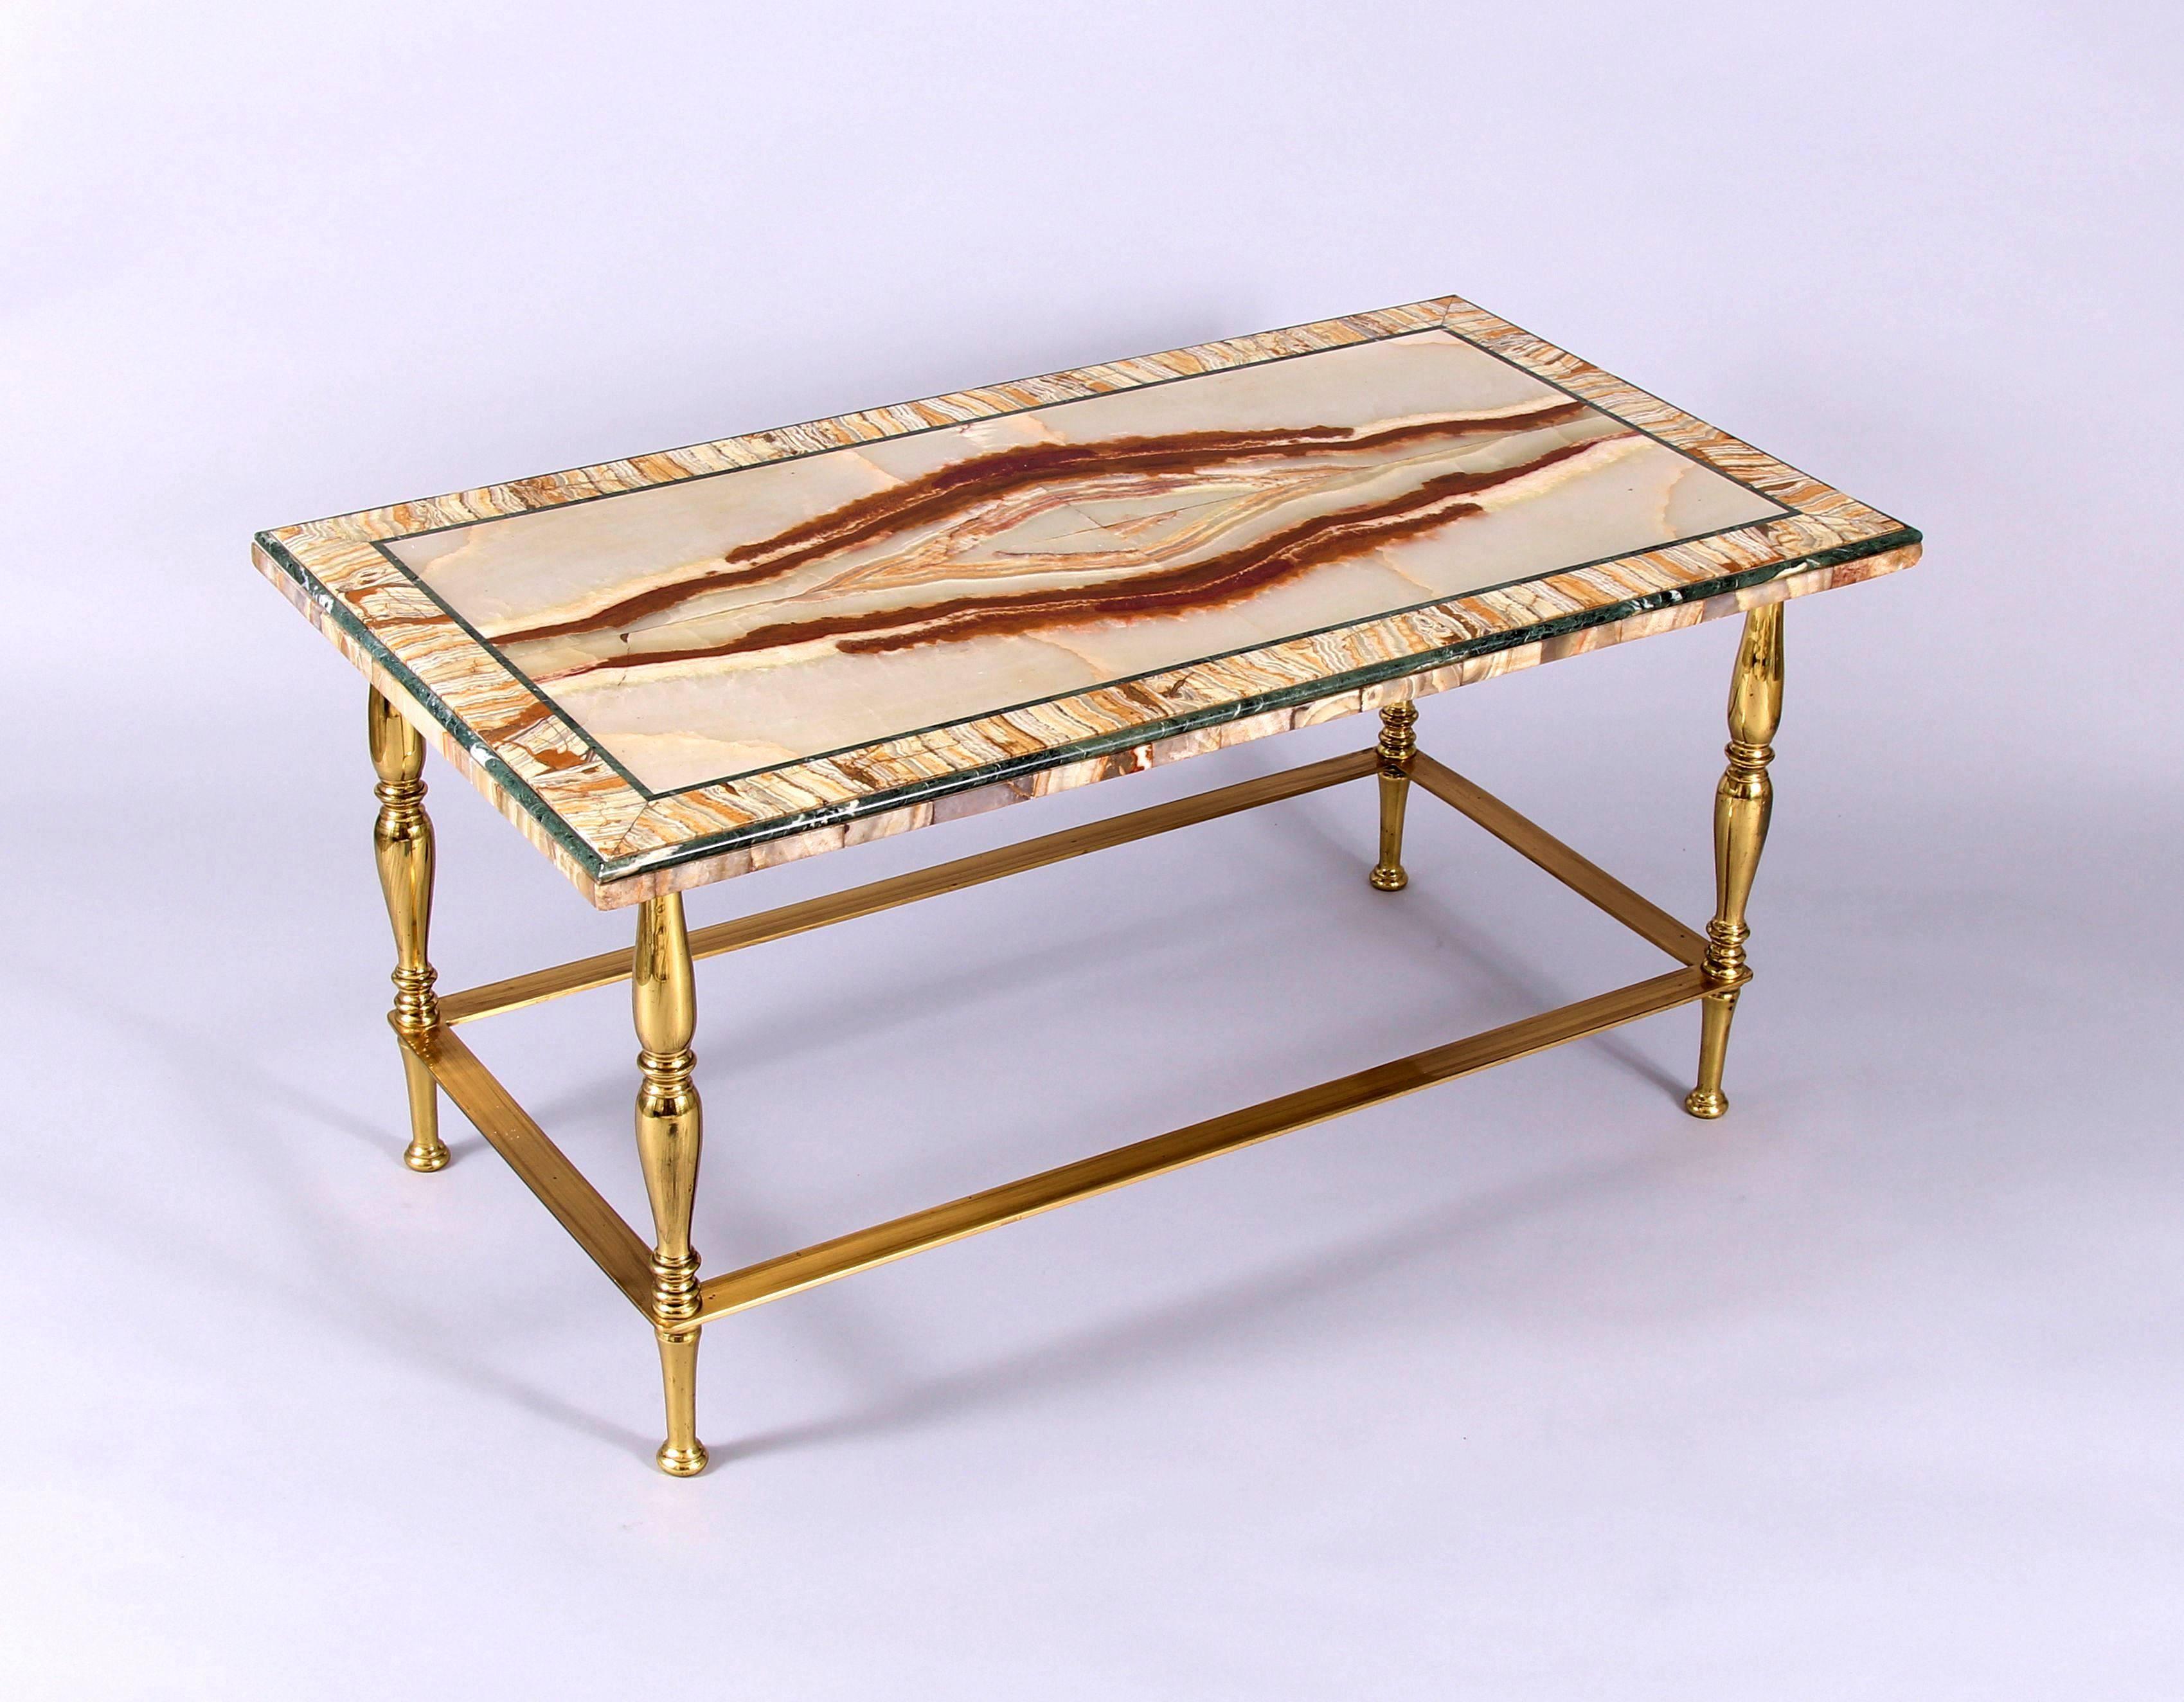 Very fine and rare early 20th century Italian onyx and verde antico cocktail or coffee table, circa 1935. Constructed using only the finest stone, this truly exquisite and refined table is a masterpiece in design. The outstandingly beautiful colours